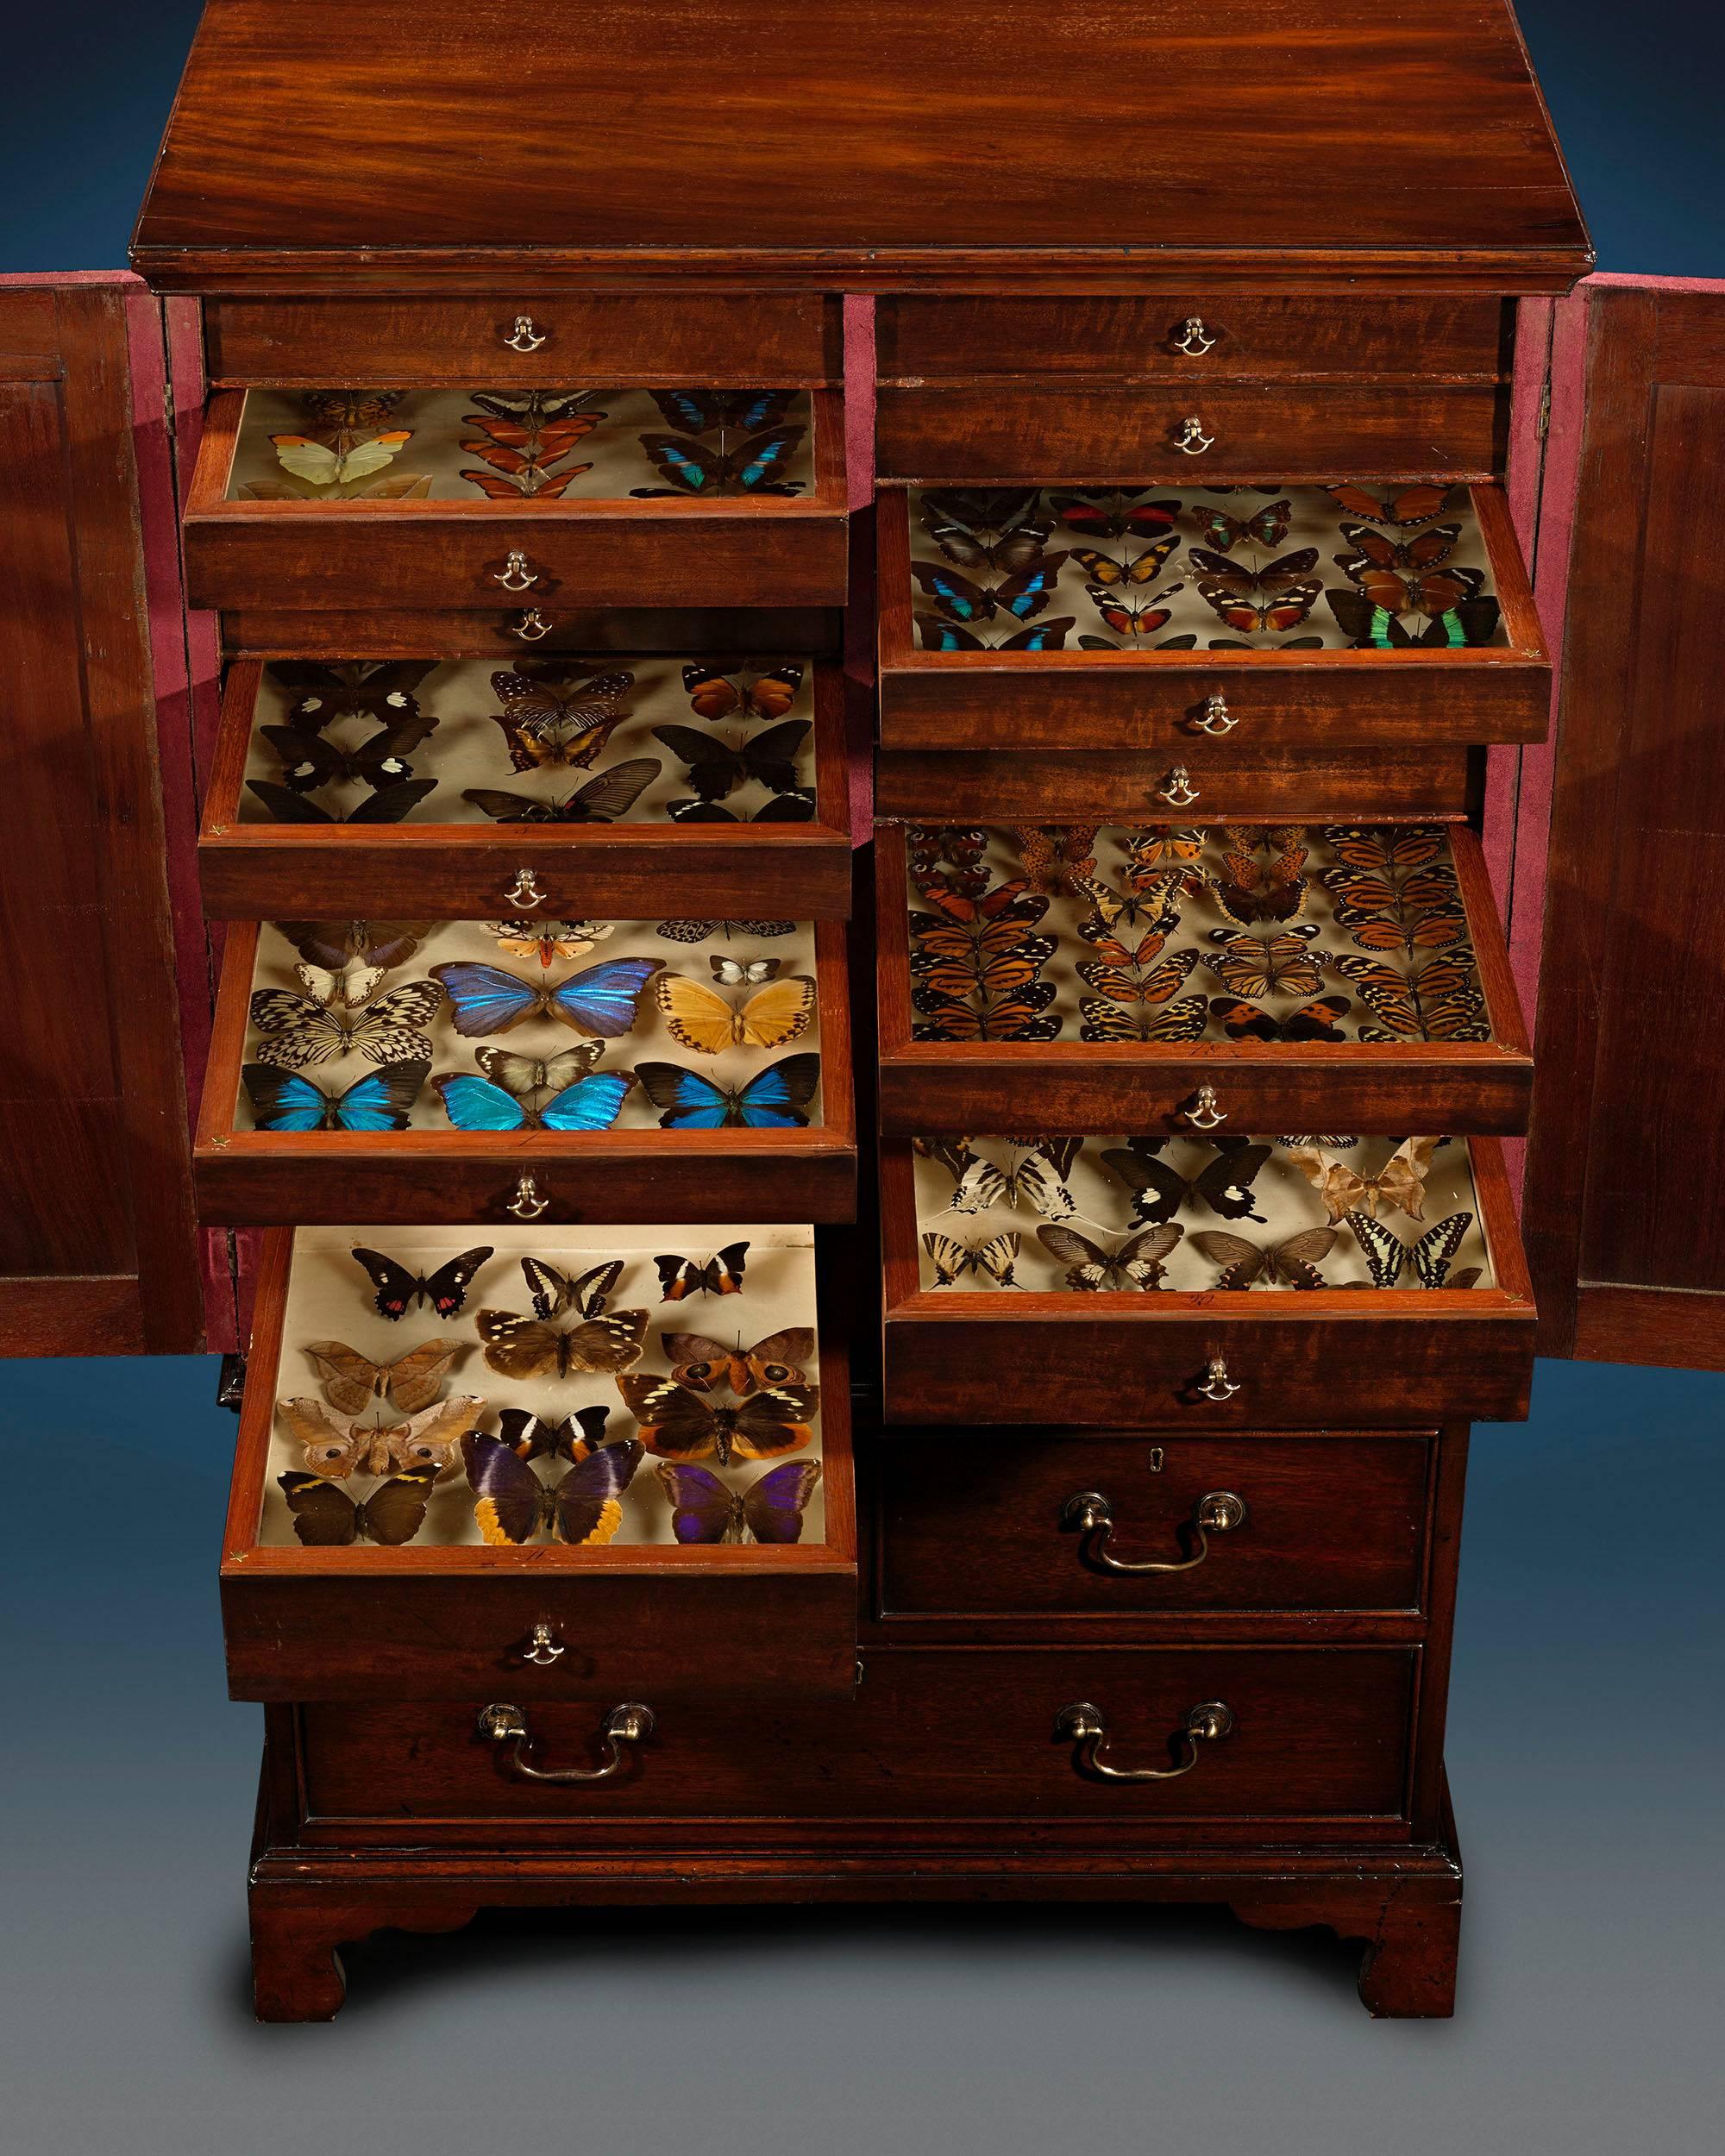 Some of the world's most amazing butterfly species are on display in this beautiful mahogany collector's cabinet. The cabinet's drawers contain hundreds of butterflies and moths, with close-fitting glass tops to insulate from damaging dust and